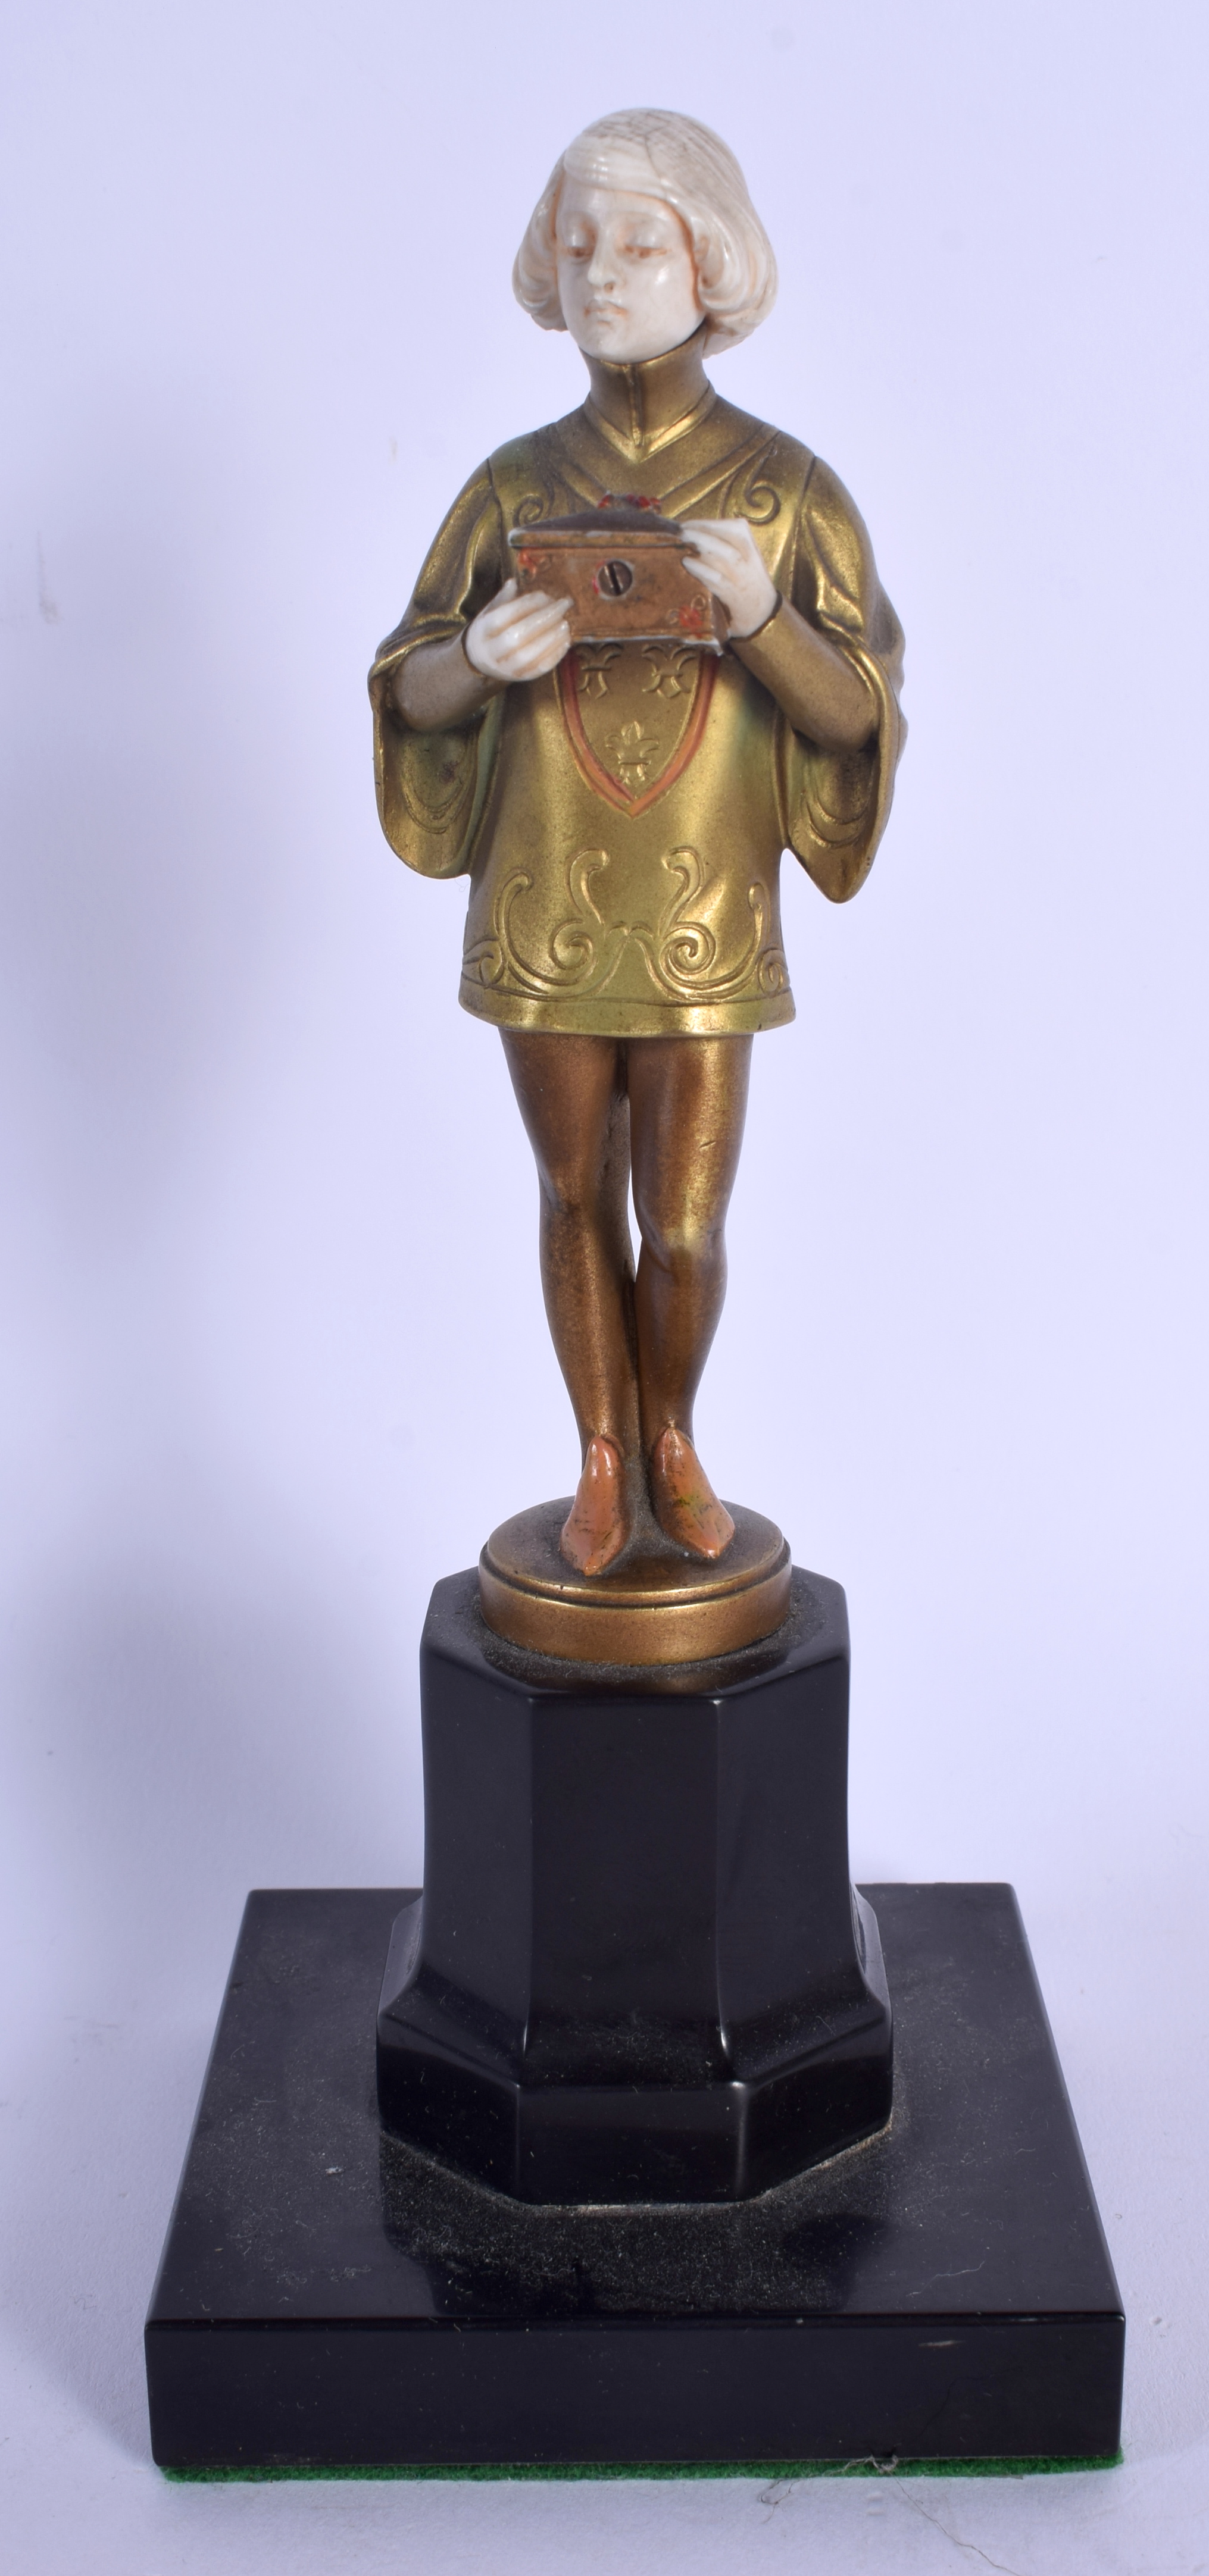 Ferdinand Preiss (1882-1943) German, Cold painted bronze and ivory, Boy and casket. Bronze 13 cm hig